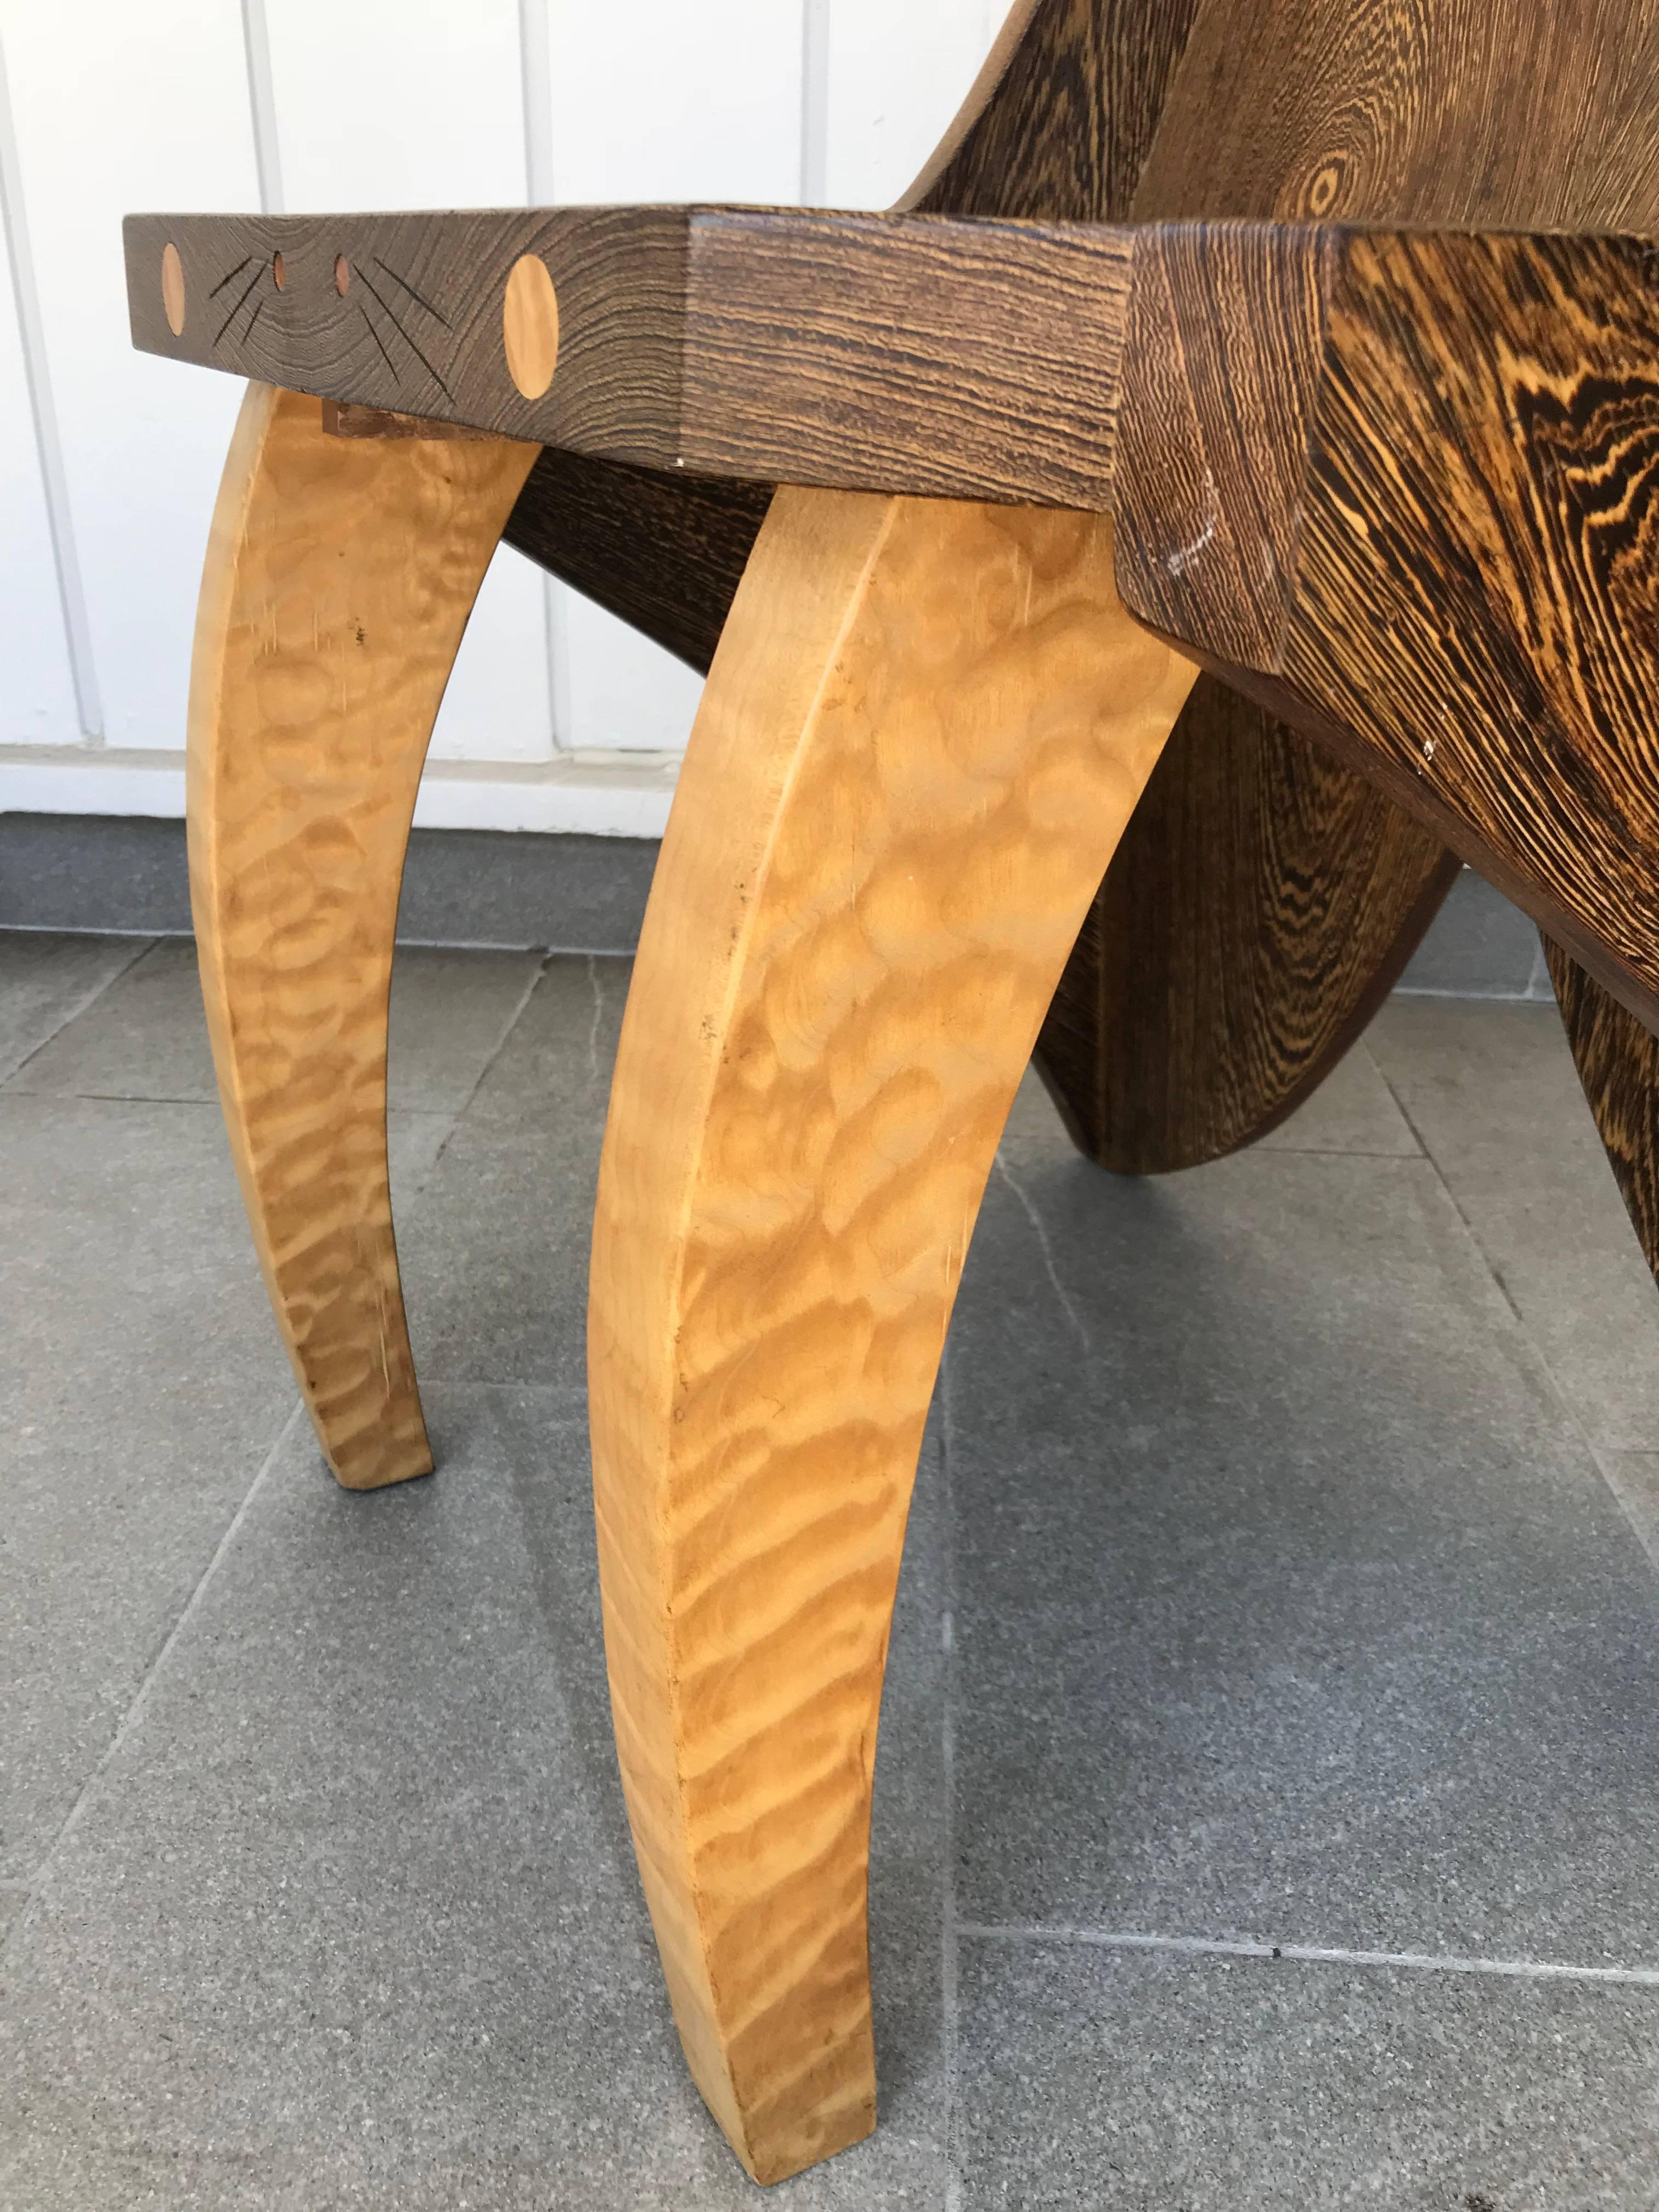 Uniquely designed chair in the shape of a butterfly, signed by artist Reid.
It's made of solid wenge and zebrawood. Beautiful details like the 4 dots on the front of the seat and the carvings between them.
This chair is a perfect statement for an